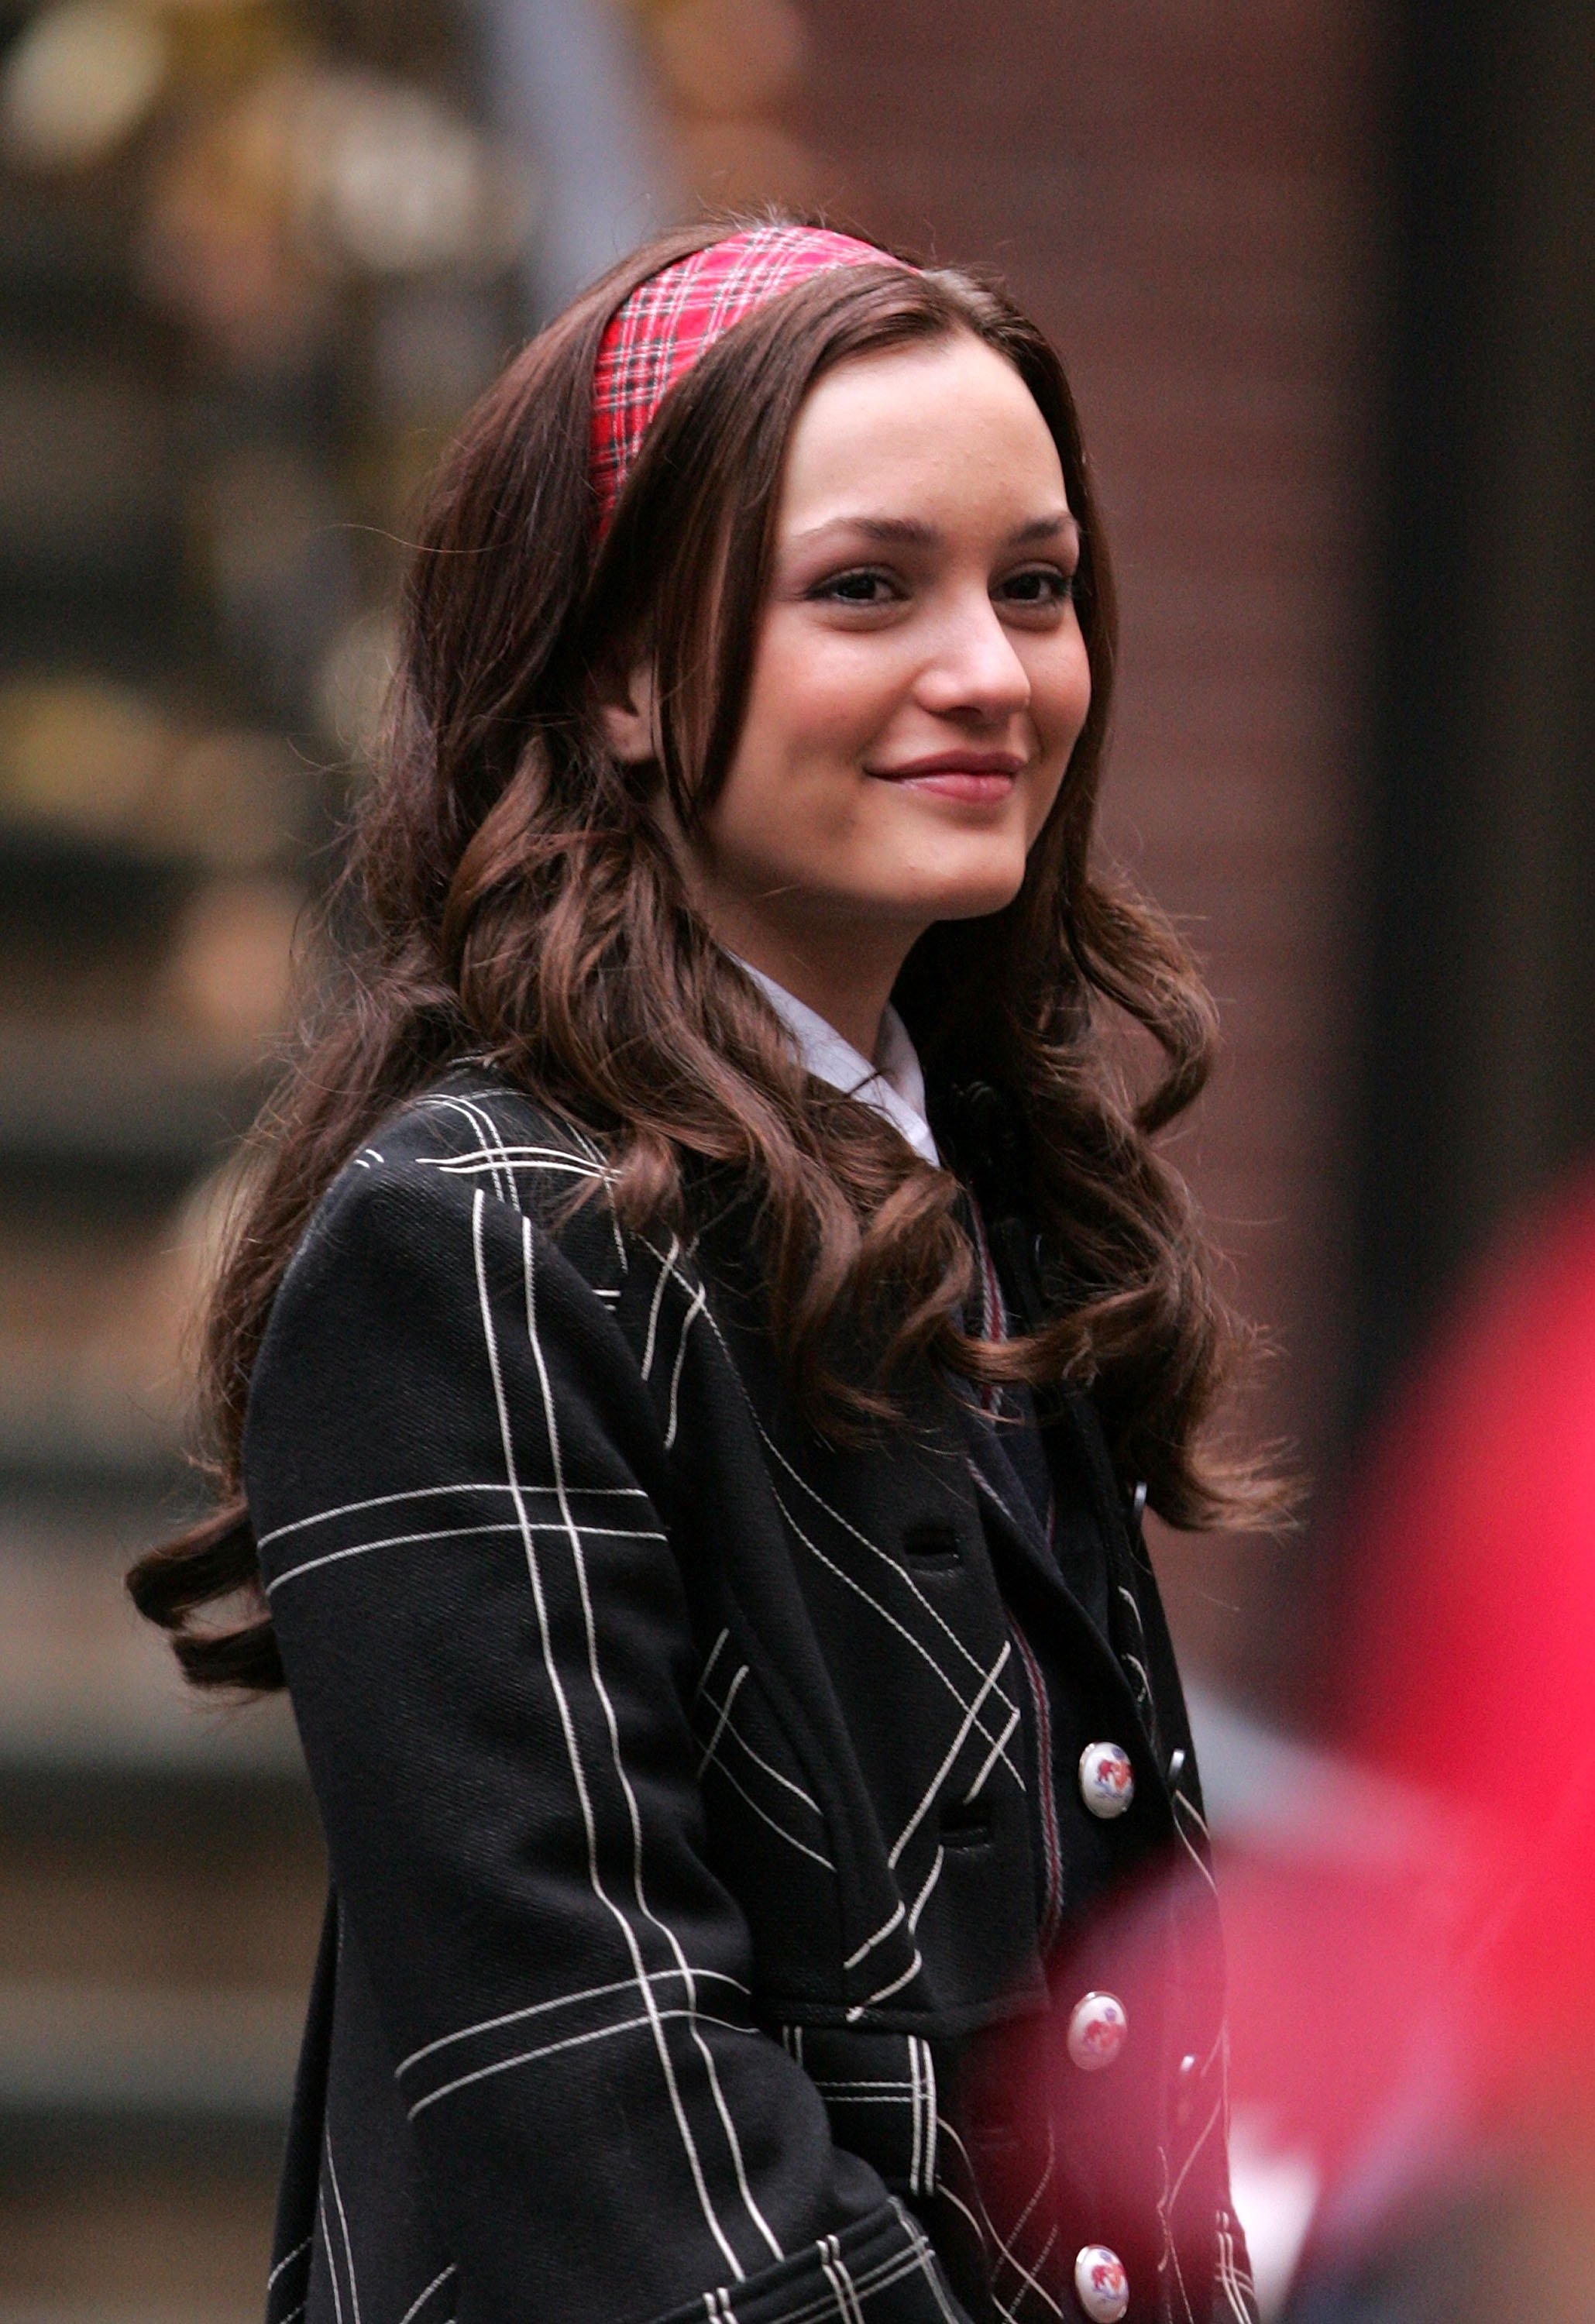 Leighton Meester on location for "Gossip Girl" on November 26, 2007 in New York City | Photo by James Devaney/WireImage/Getty Images